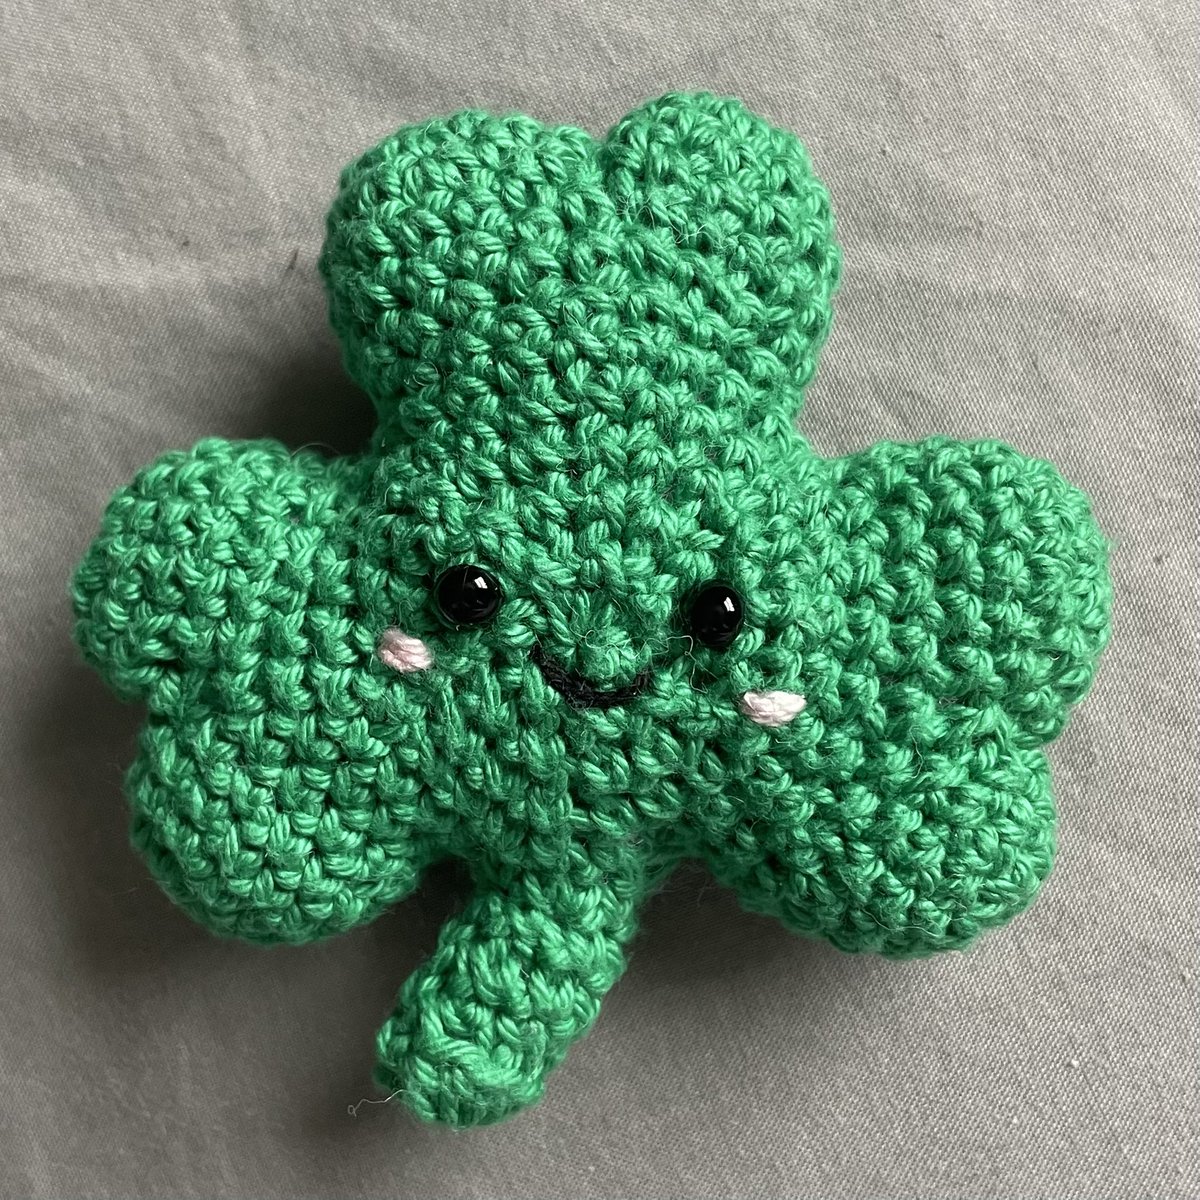 Preparing for #ISRII12 @TheISRII in Limerick by once again crocheting a little mascot ☘️🇮🇪 Suggestions for names welcome